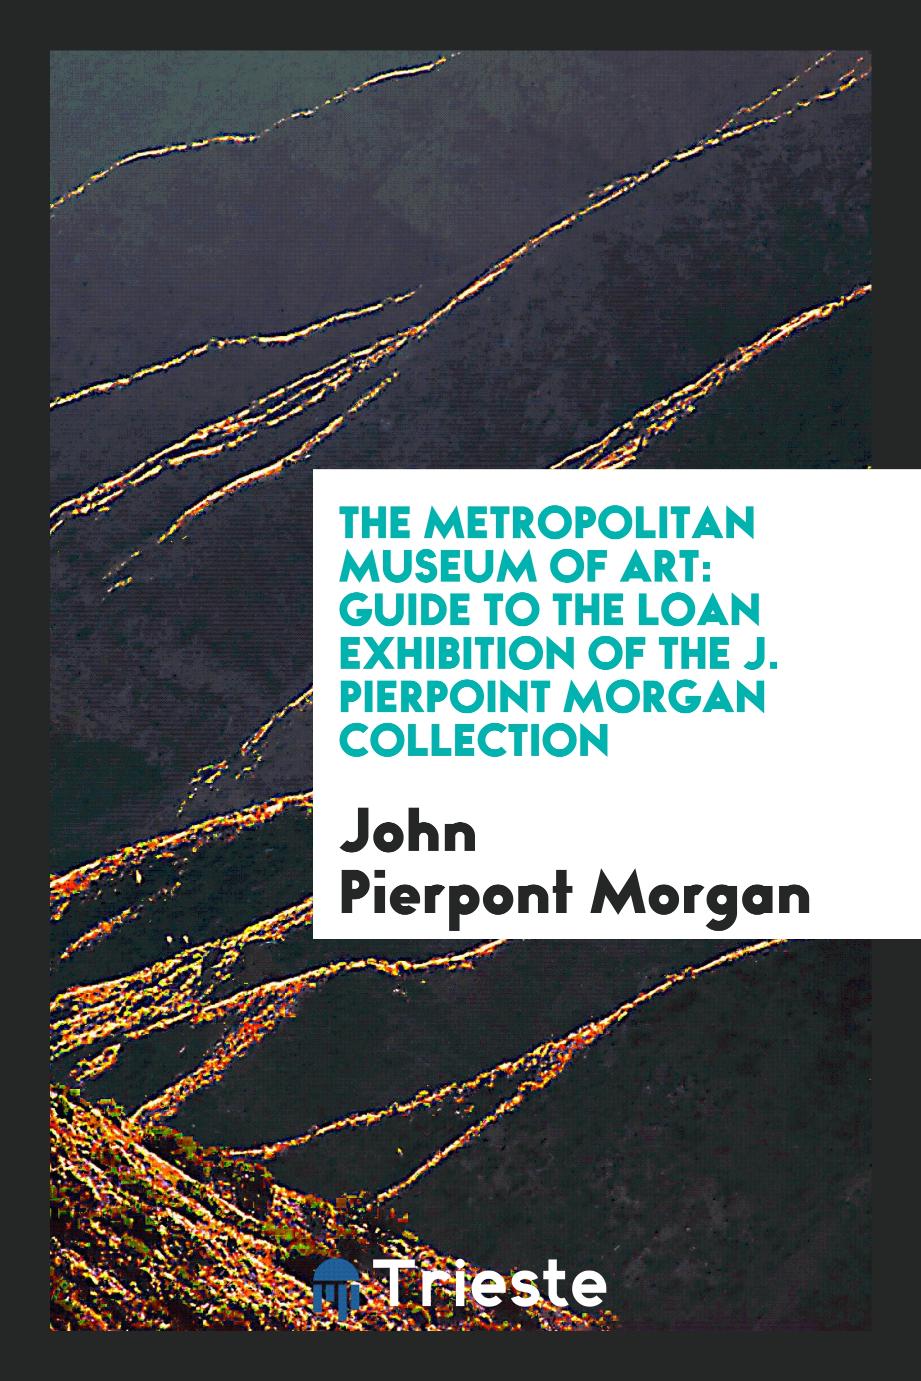 The Metropolitan Museum of Art: Guide to the Loan Exhibition of the J. Pierpoint Morgan Collection